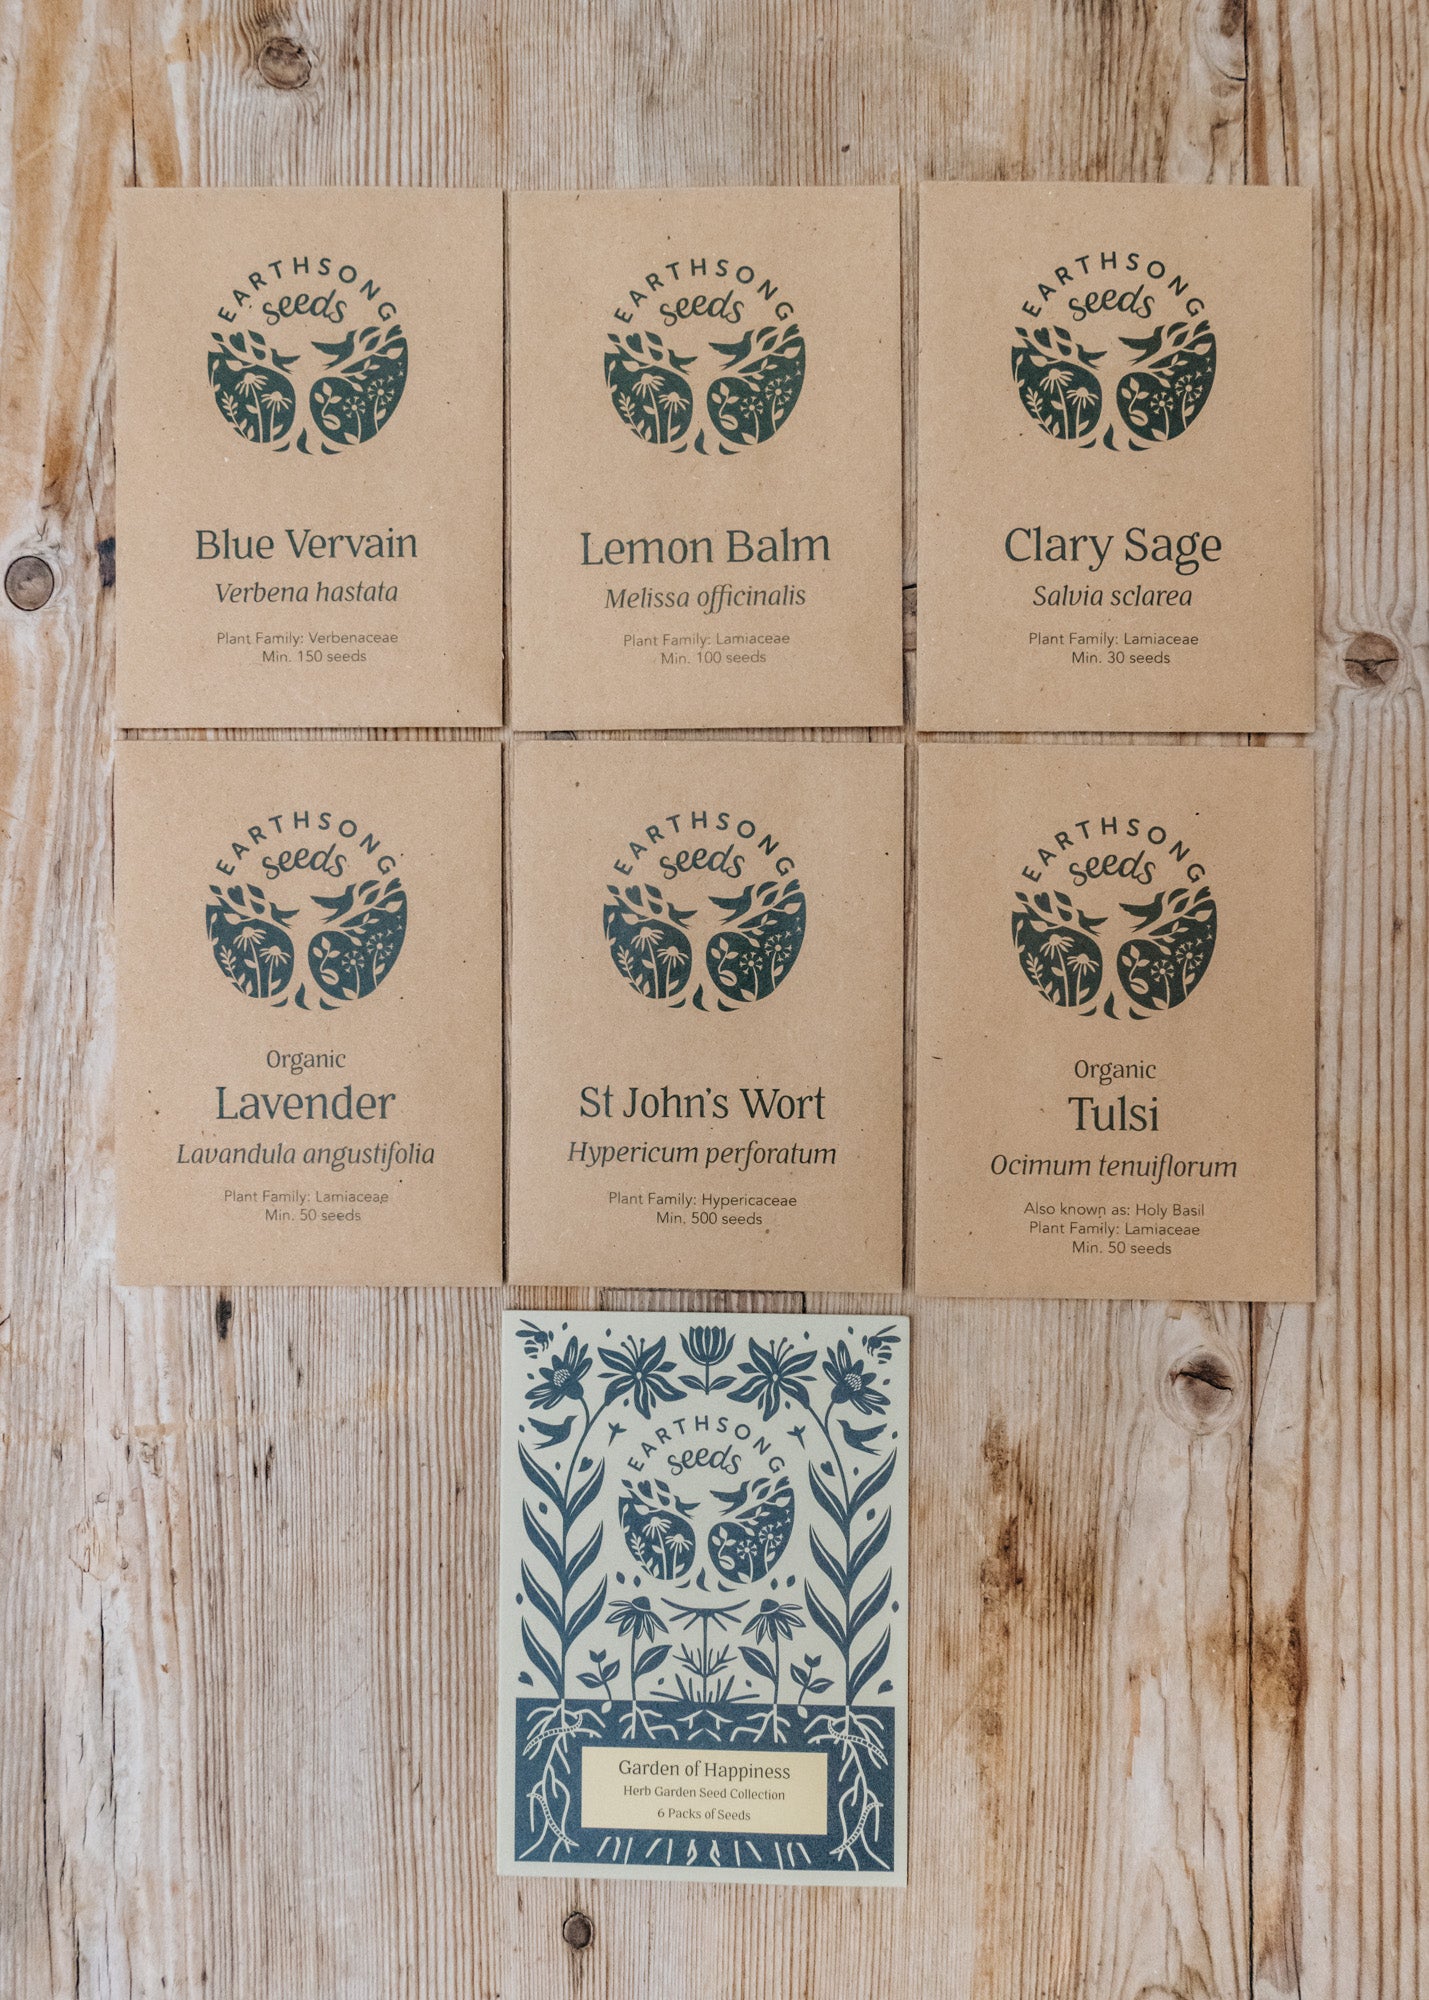 Earthsong Seeds Garden of Happiness Seed Collection